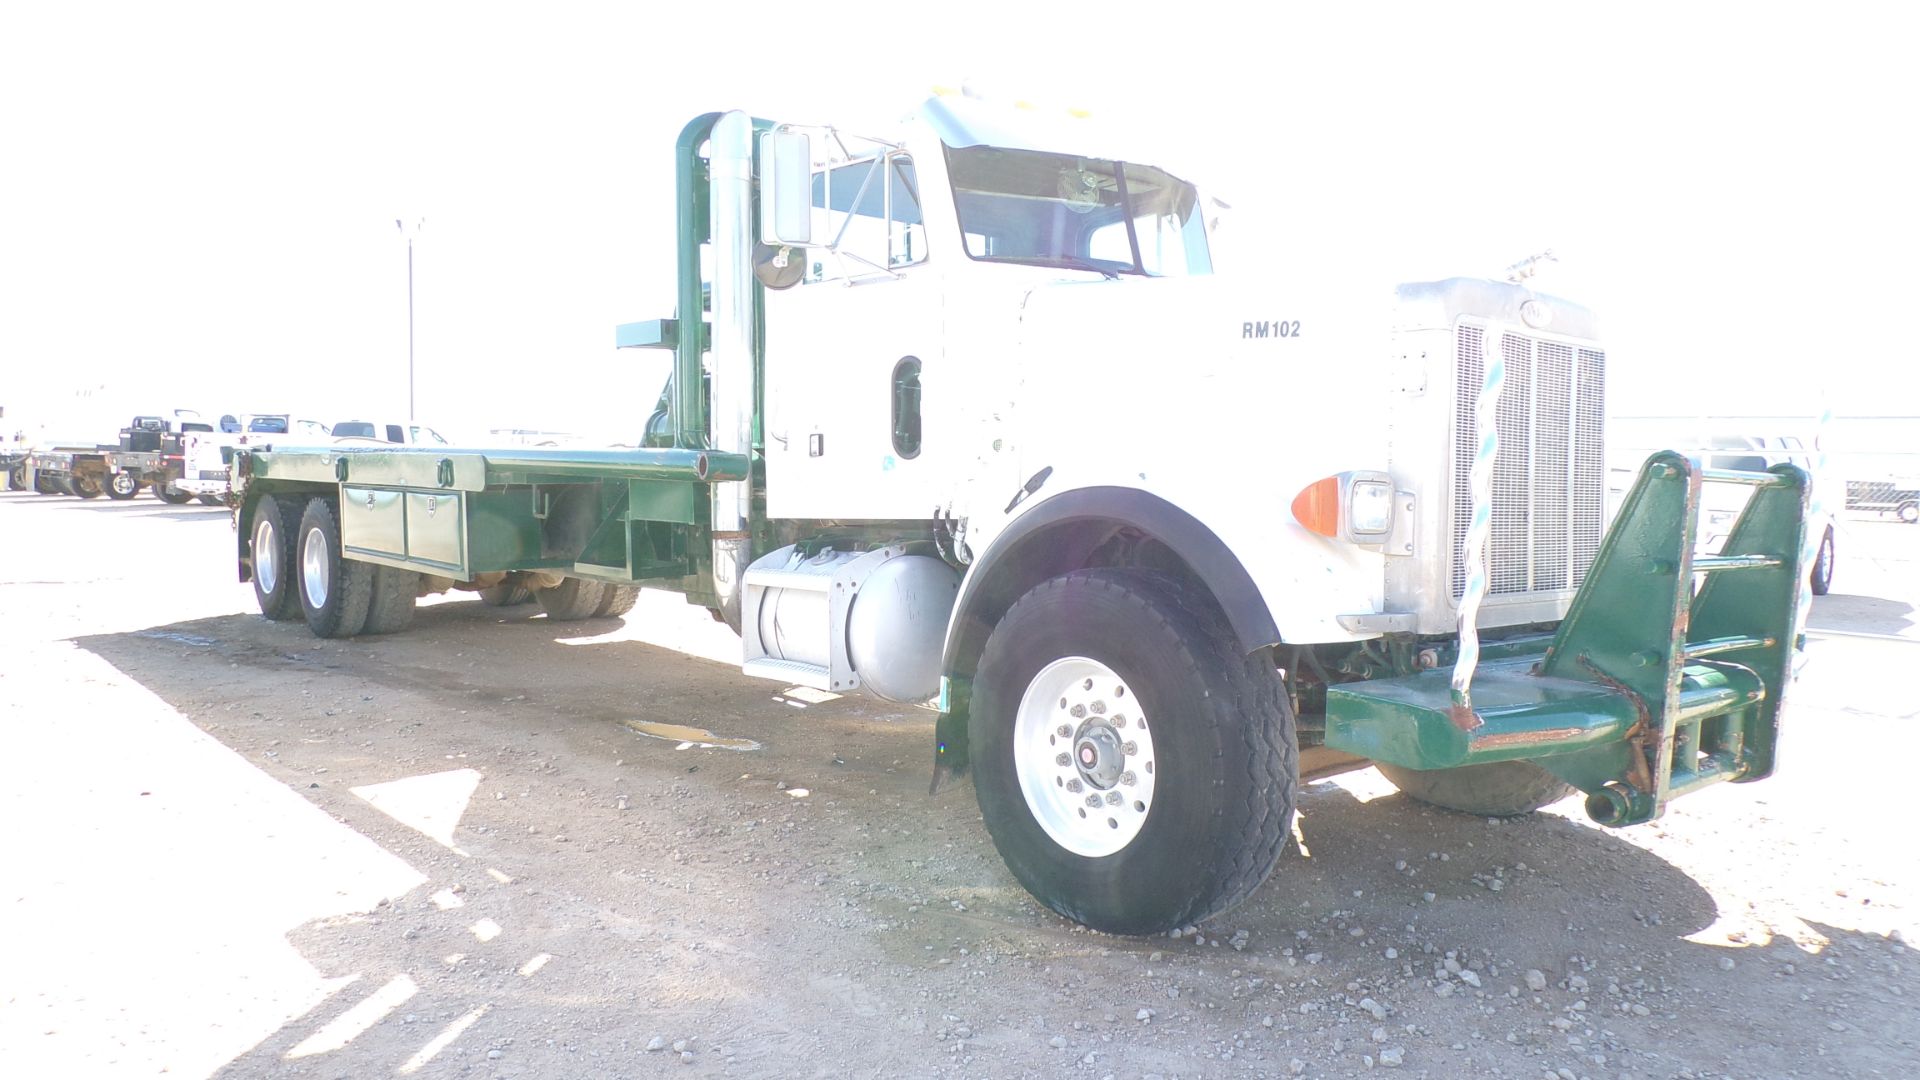 Located in YARD 1 - Midland, TX (6243) (X) 1996 PETERBILT 357 T/A GIN/ POLE TRUCK, VIN- - Image 8 of 8